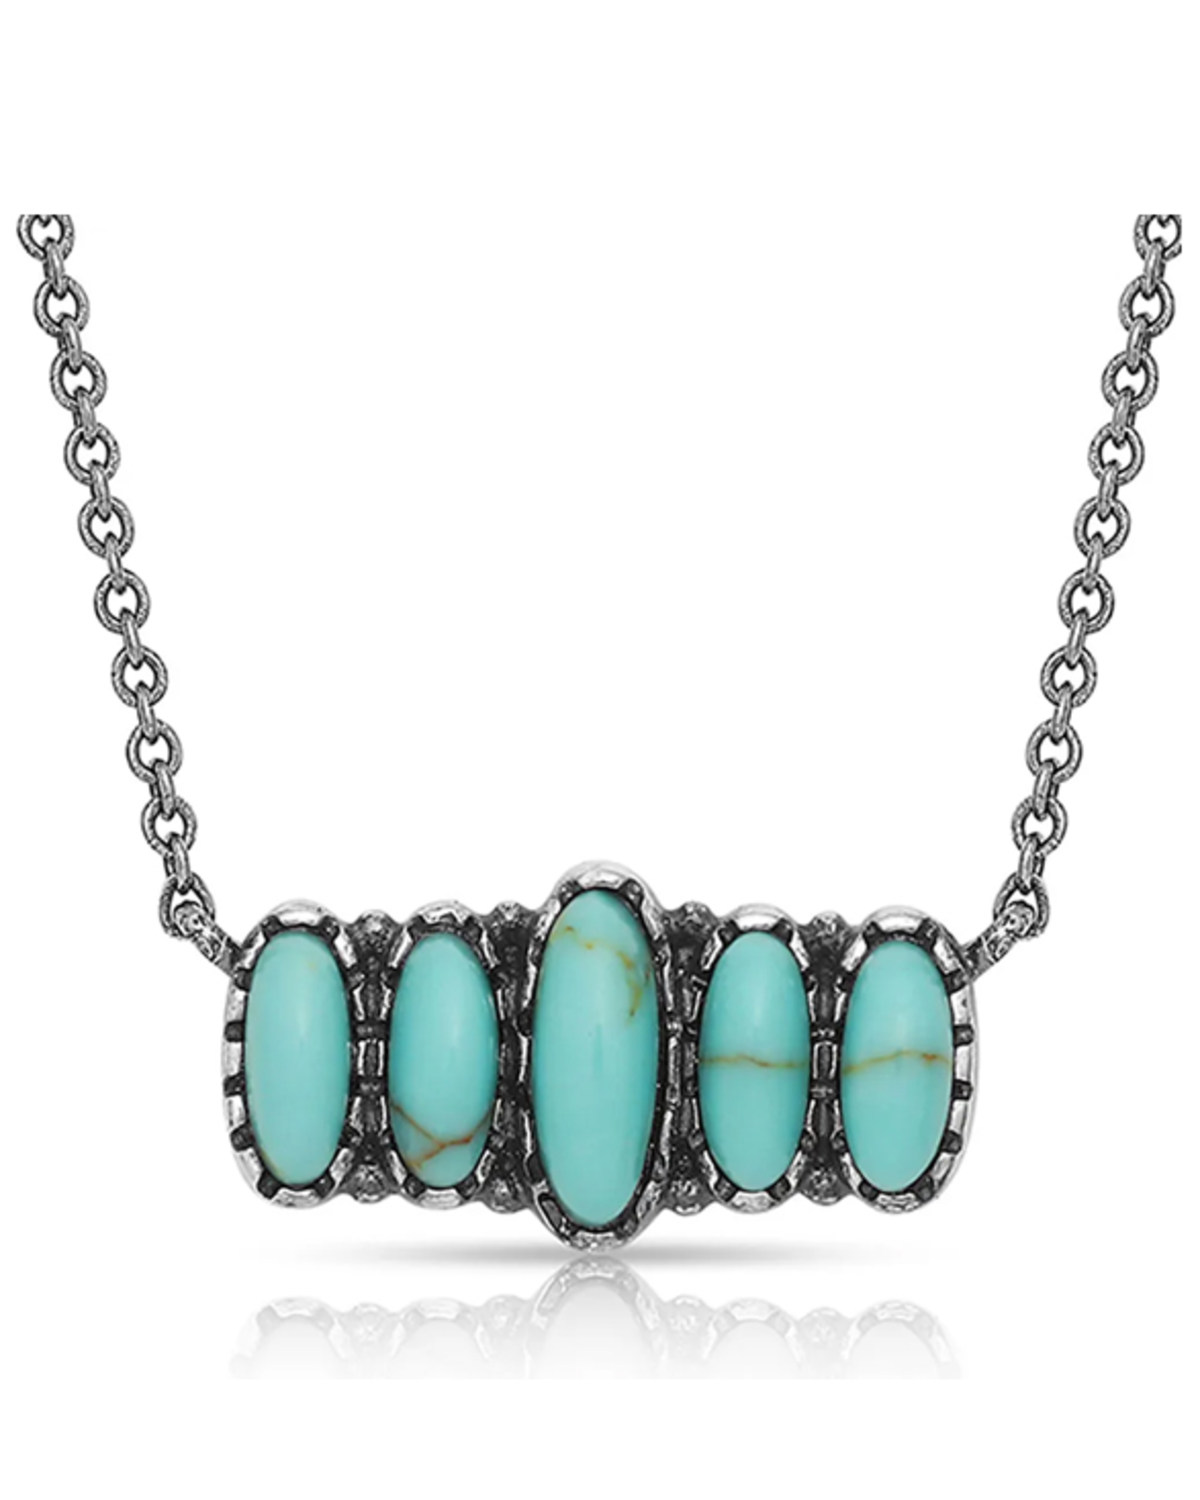 Montana Silversmiths Women's Turquoise Quint Bar Necklace